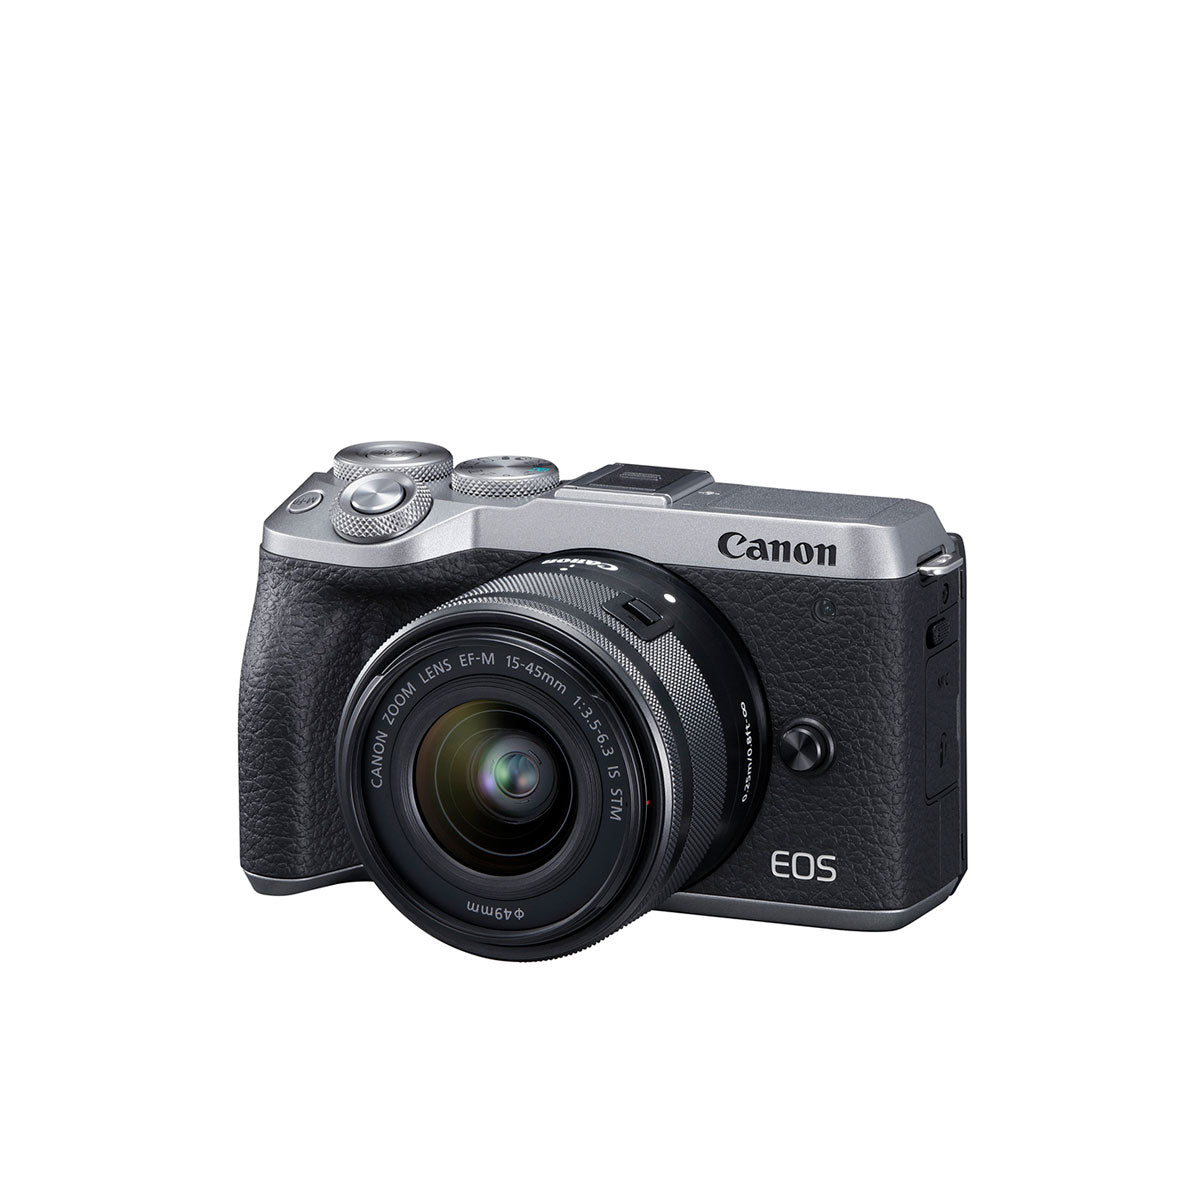 Canon EOS M6 Mark II Mirrorless Camera with EF-M 15-45mm IS STM Lens and EVF (Silver)